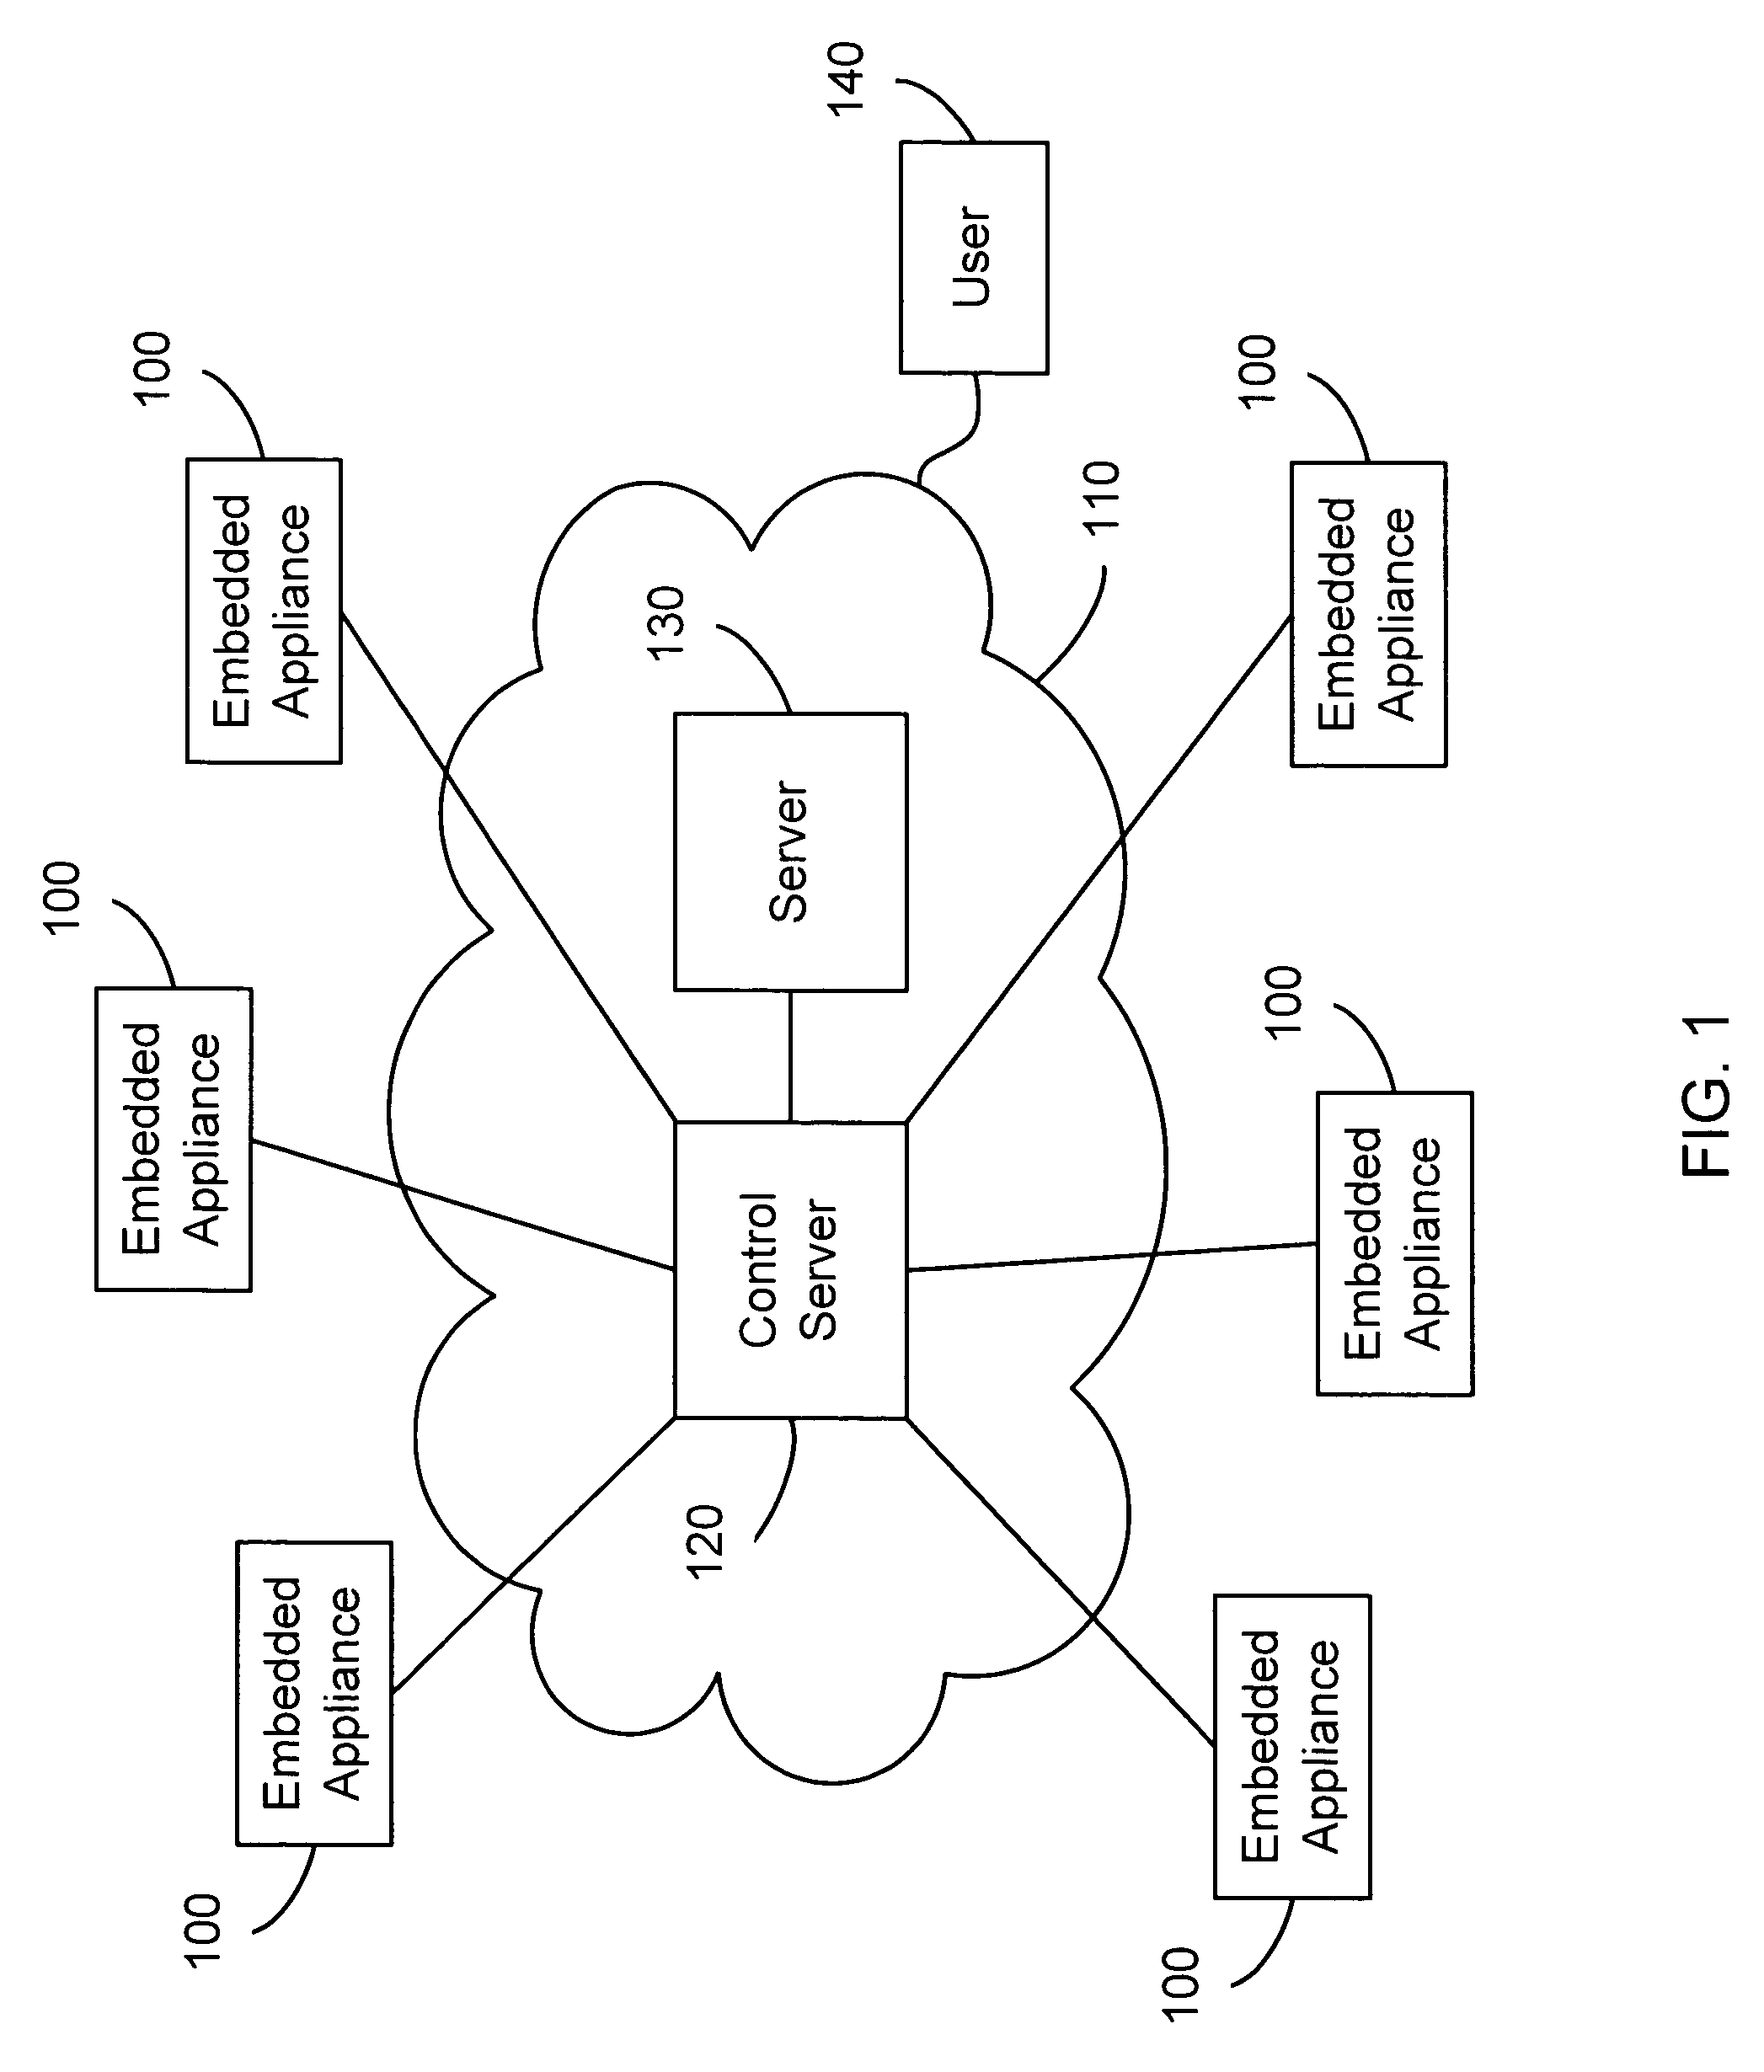 Embedded appliance for multimedia capture